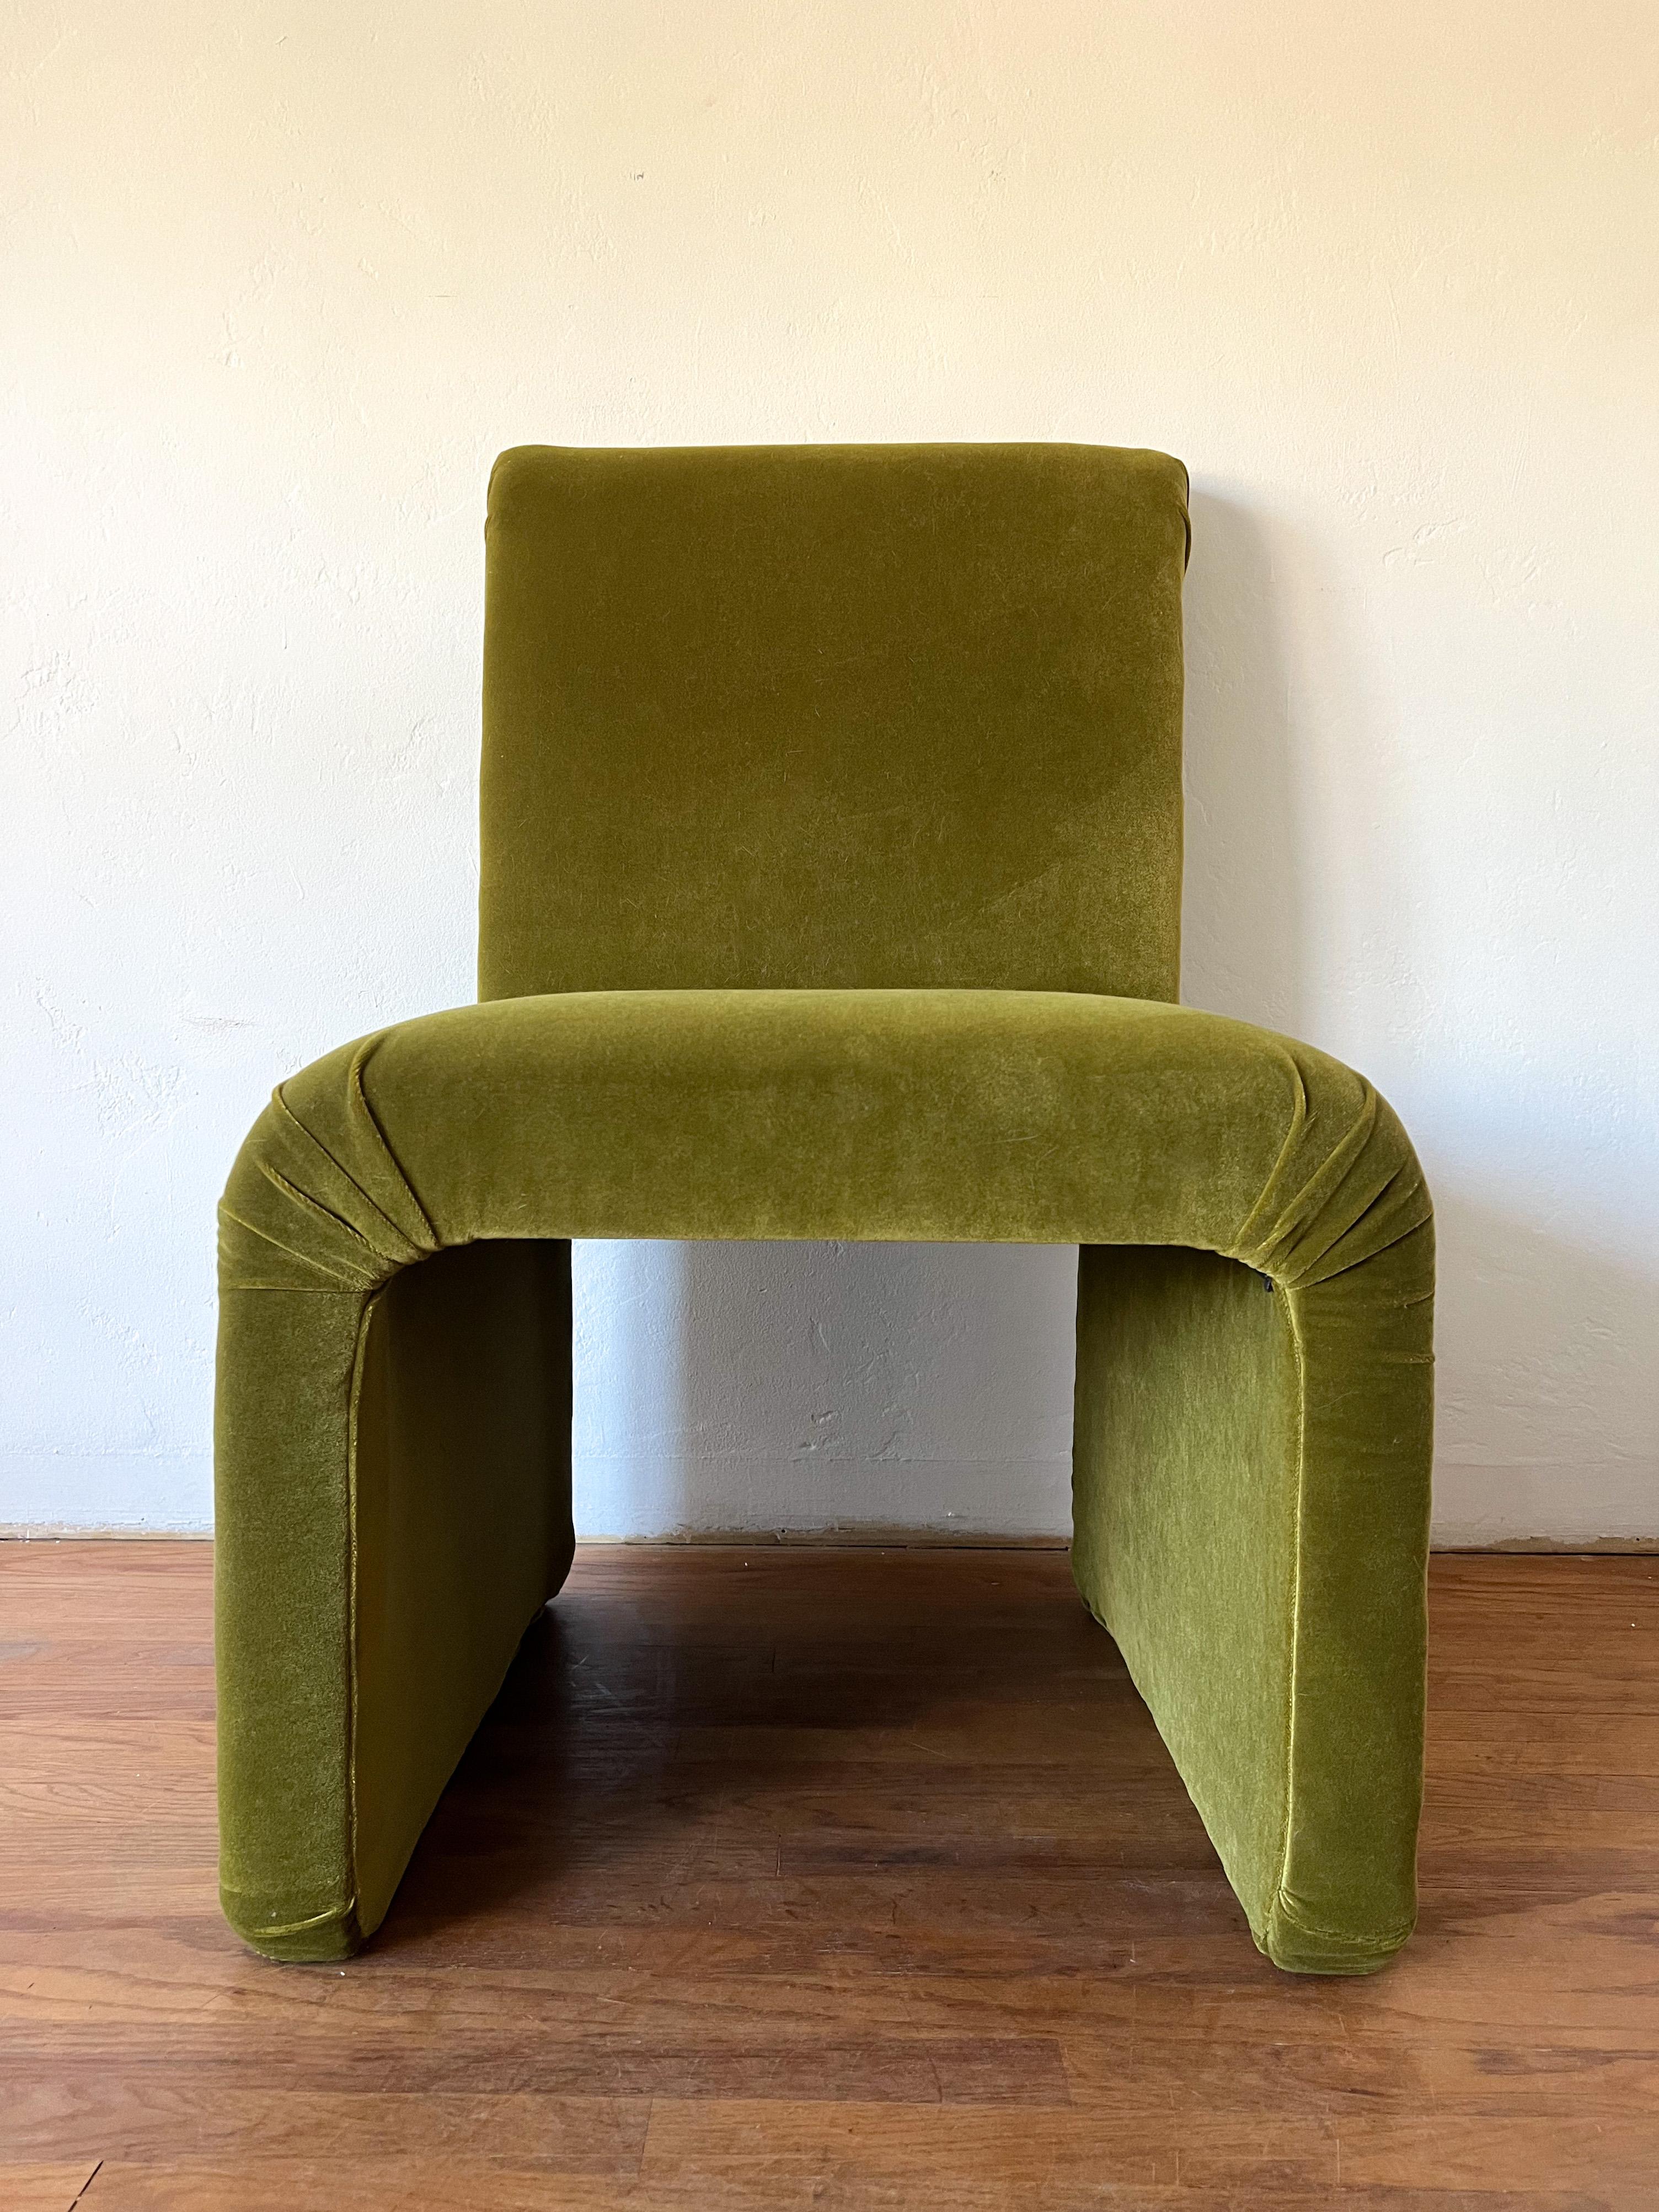 This is a newly reupholstered waterfall lounge chair in the style of legendary iconic furniture designer Karl Springer.  The fabric is a very soft and high quality velvet. Color is a rich moss. 